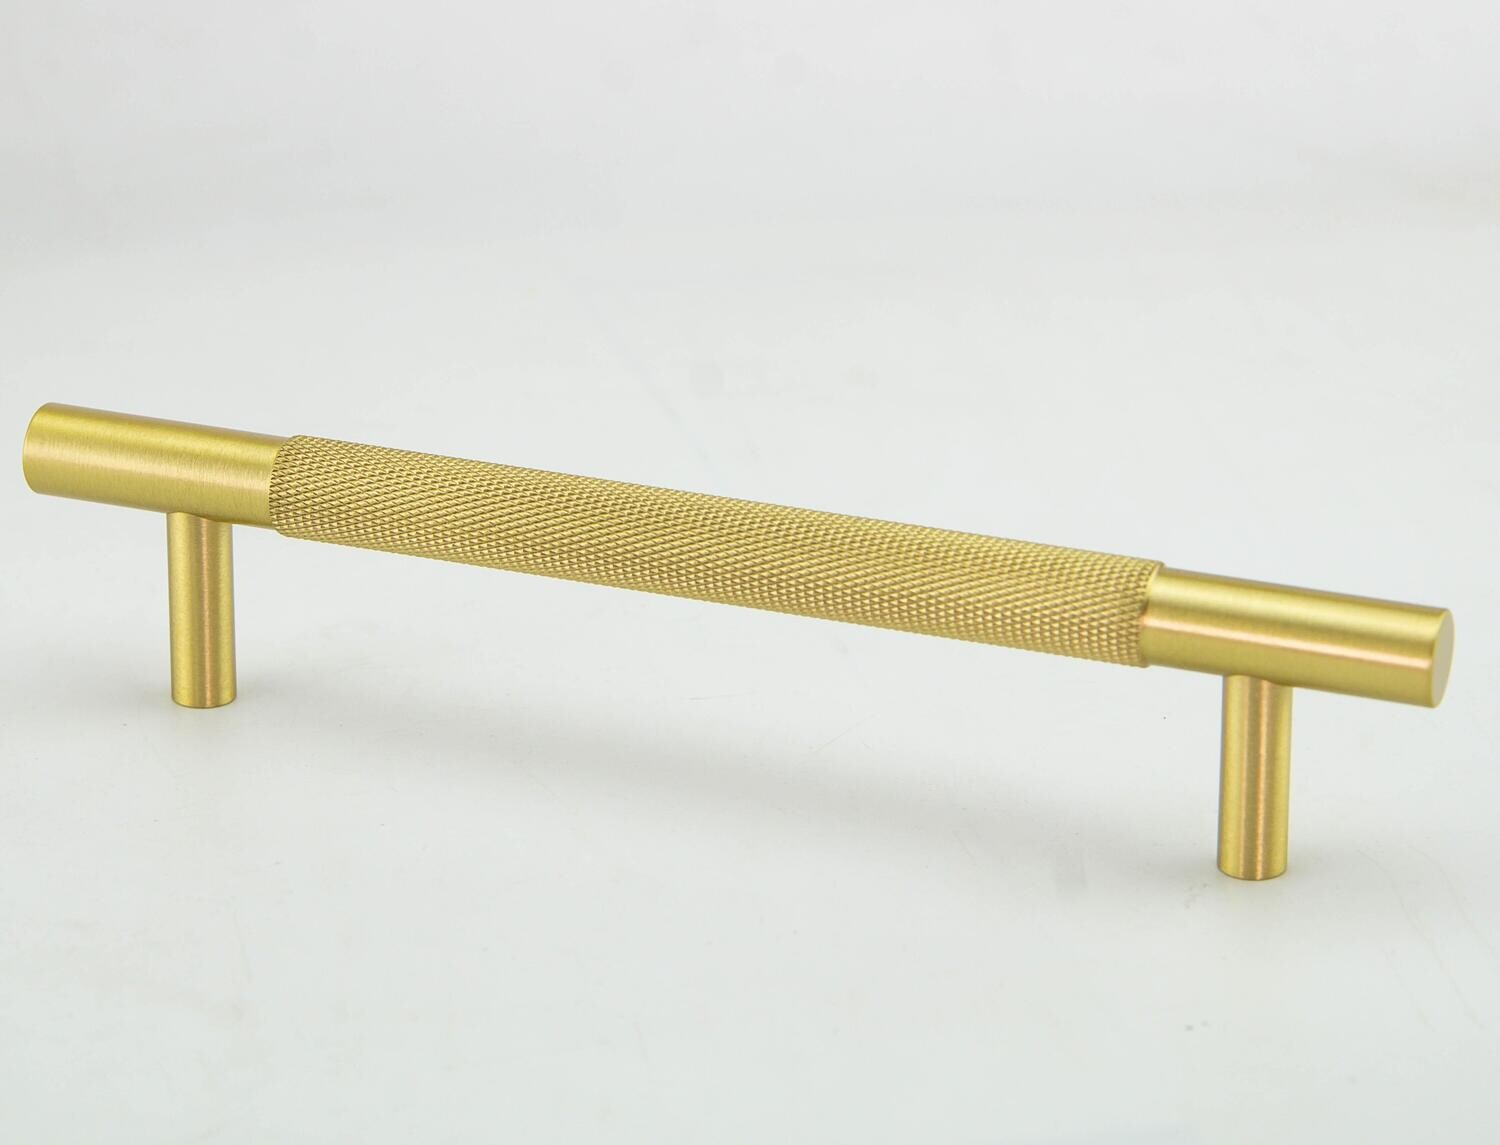 Knurled Texture Brass Kitchen Cabinet Handle by Craftacks India